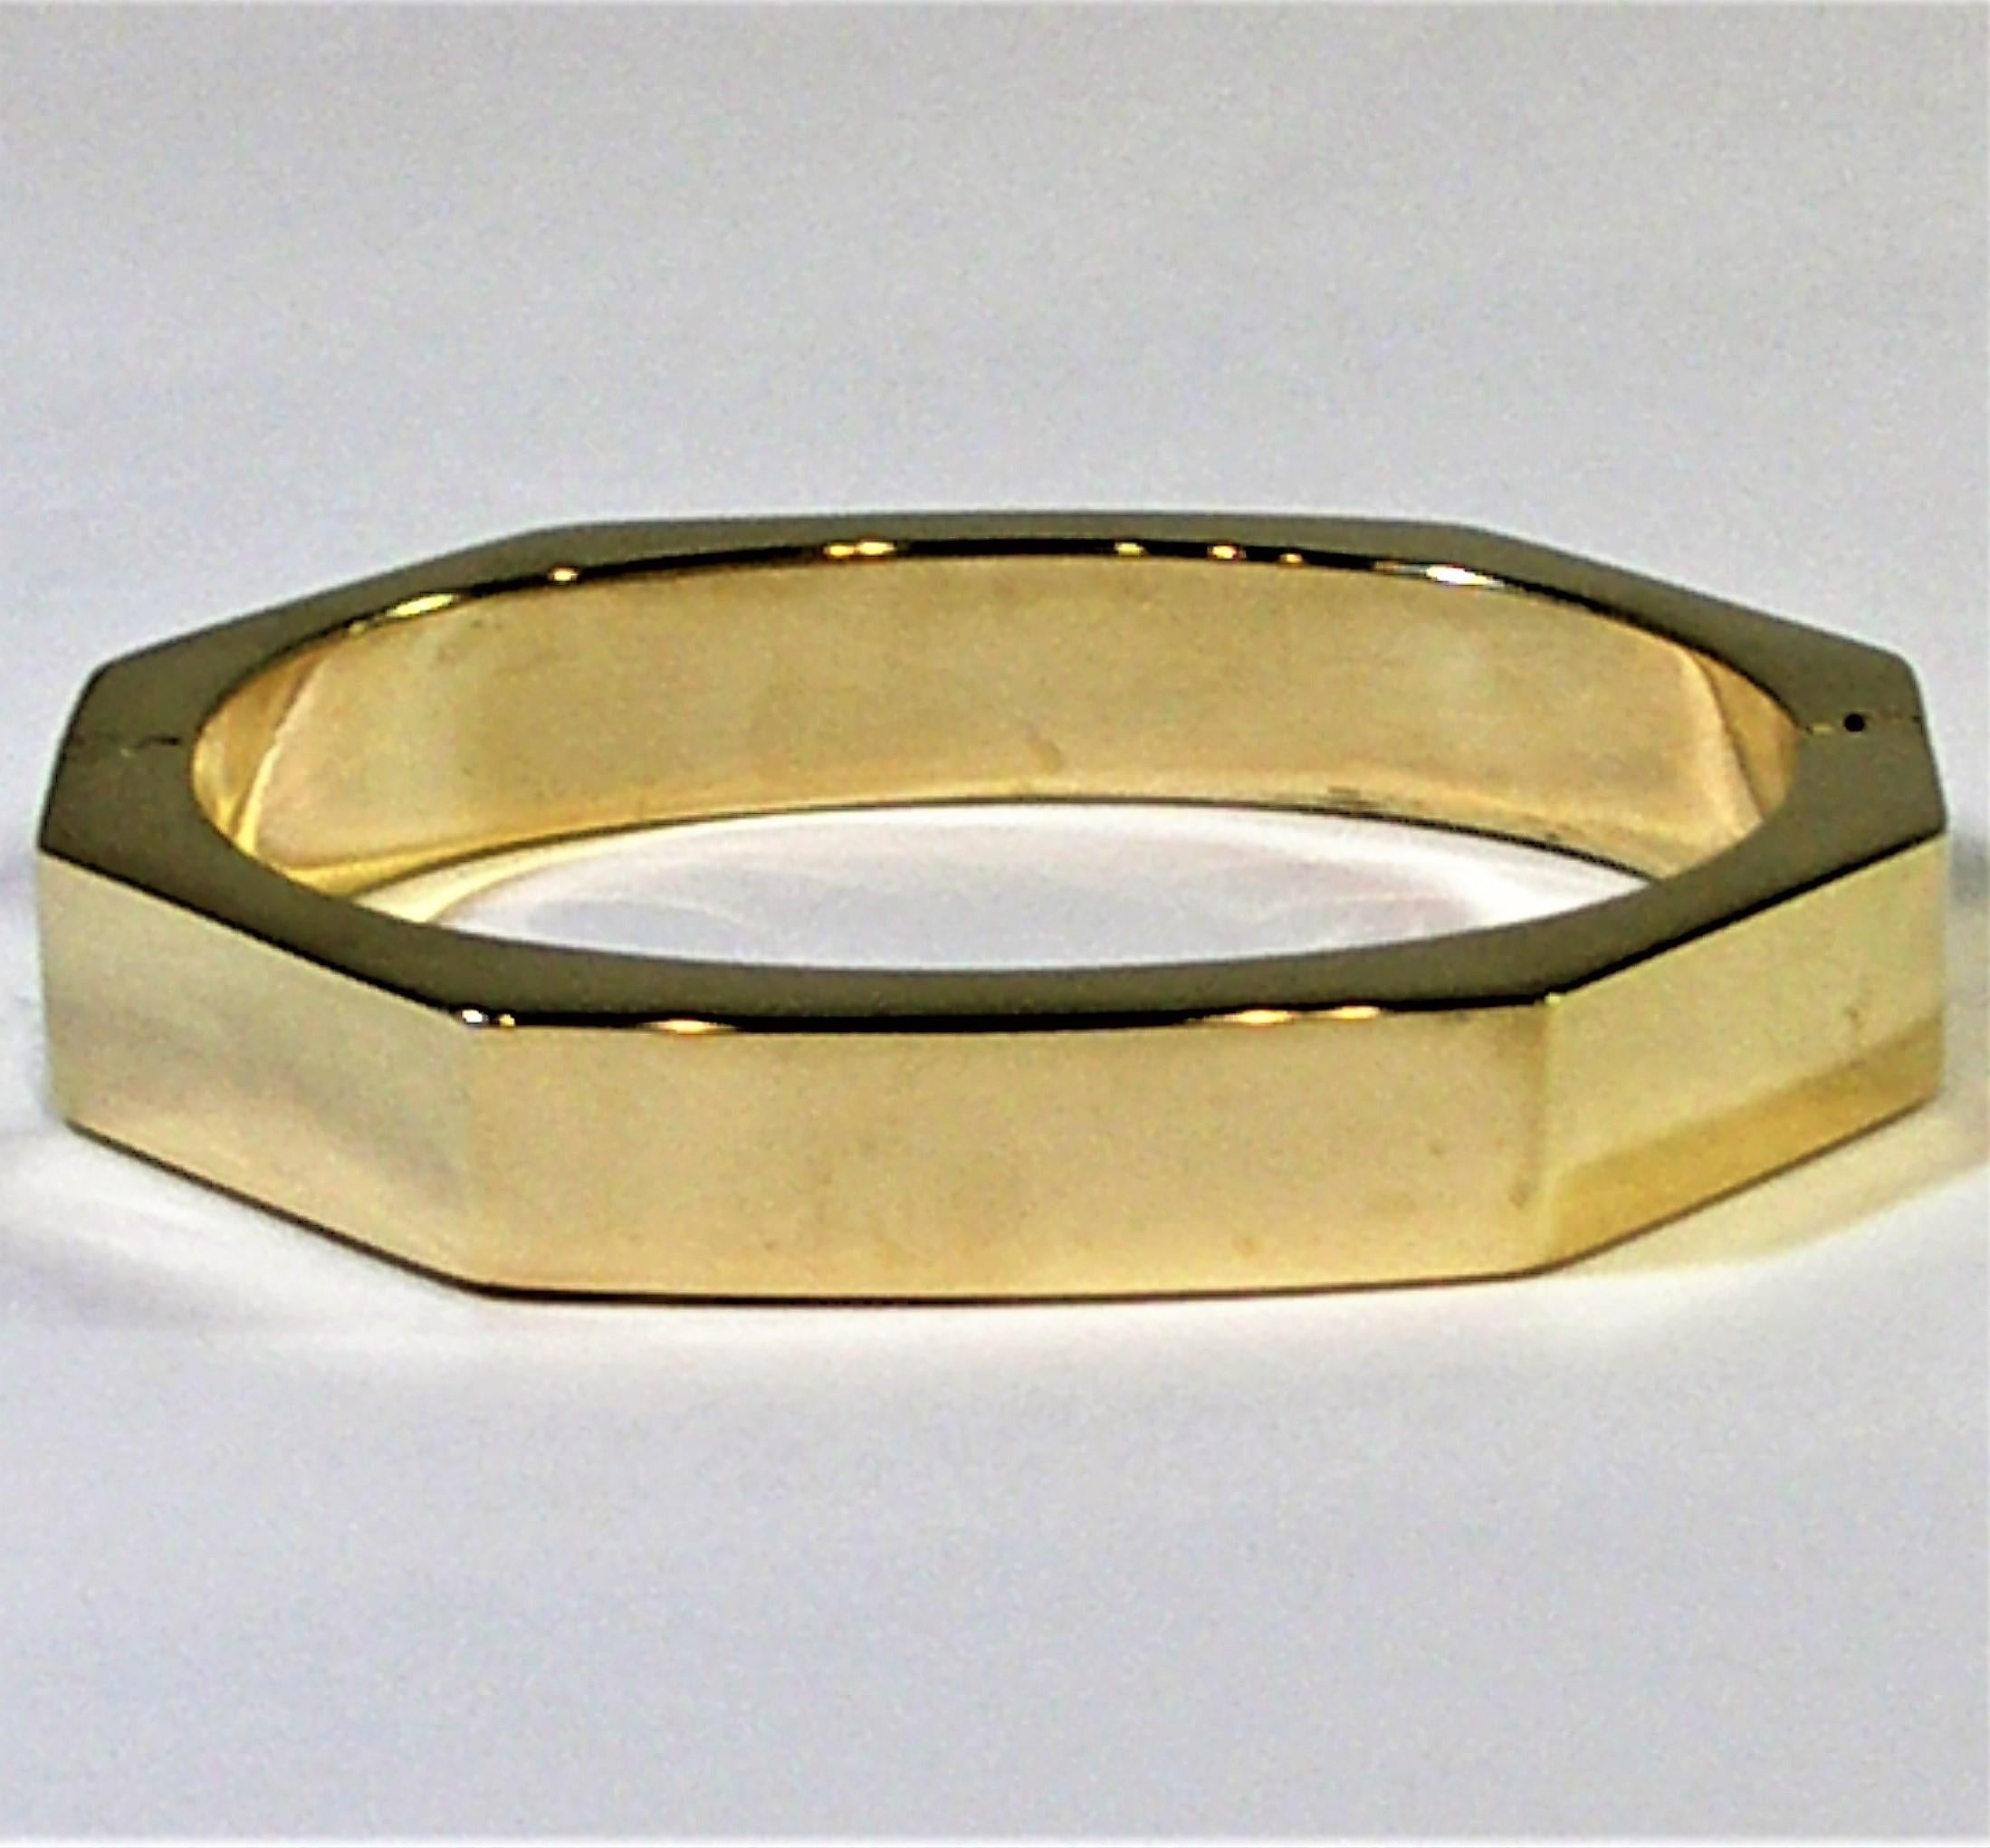 This tailored, 18K Yellow gold, octagonal shaped bangle is beautifully finished both outside and inside. The interior is oval shaped, so that it sits nicely on the wrist, 
without rolling over. Hinged on one side. Fits a small to medium size wrist.